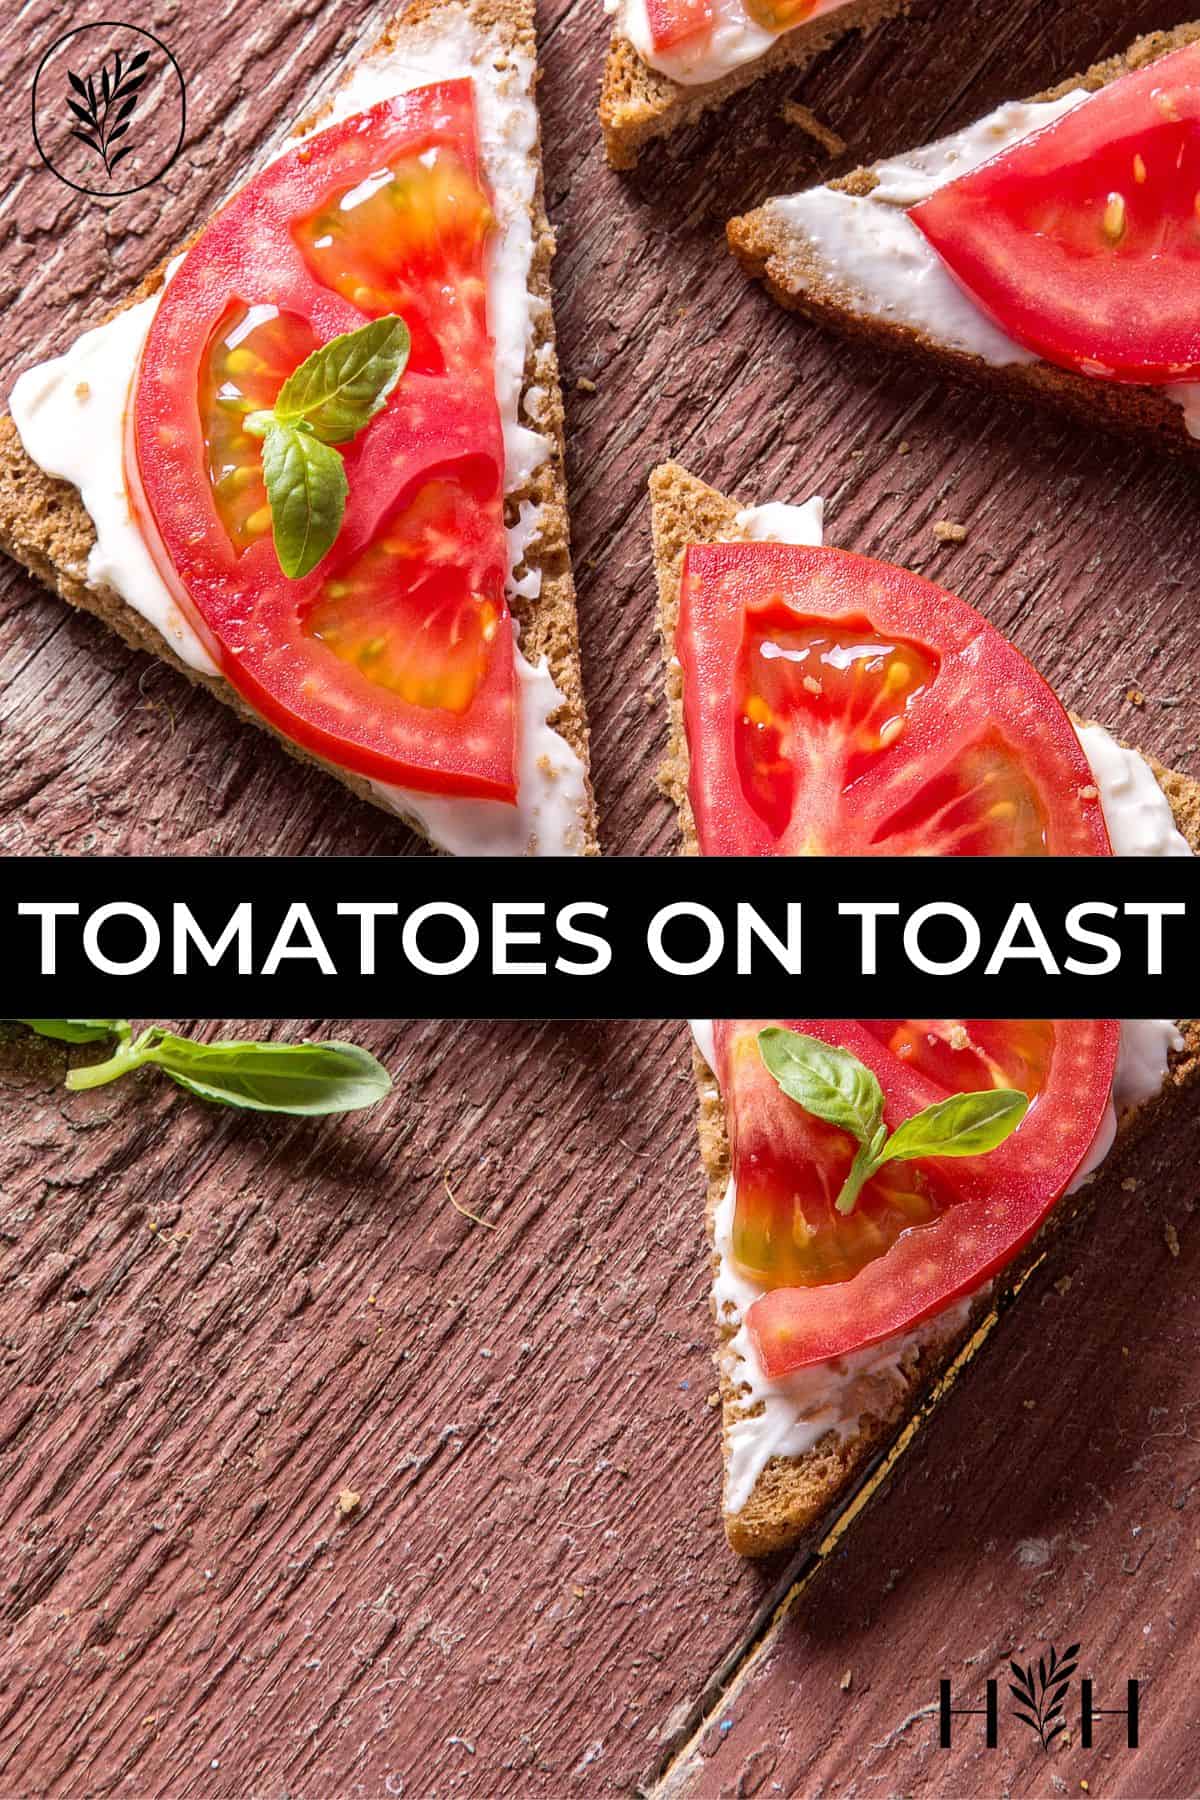 Done well, heirloom tomatoes on toast can taste like candy. The best tomato toast i've ever had was when the tomatoes are still warm from the garden. It sounds weird, but trust me, tomatoes on toast are harvest season's most delicious treat! Via @home4theharvest